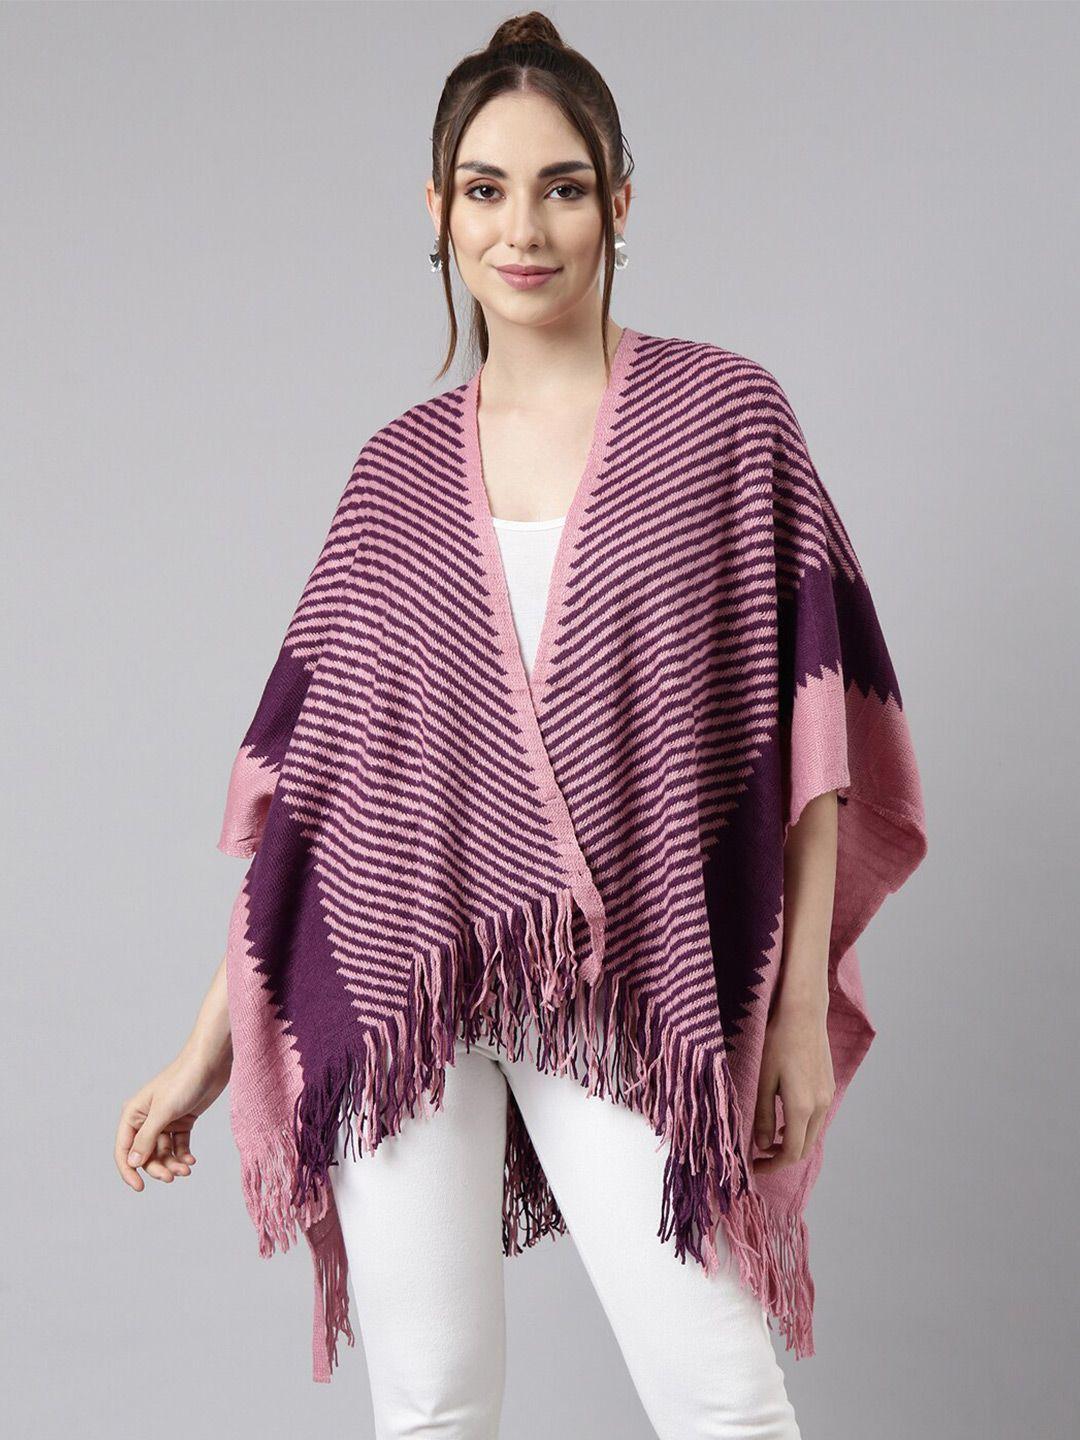 showoff-striped-shawl-collar-three-quarter-sleeves-longline-poncho-with-fringed-sweater